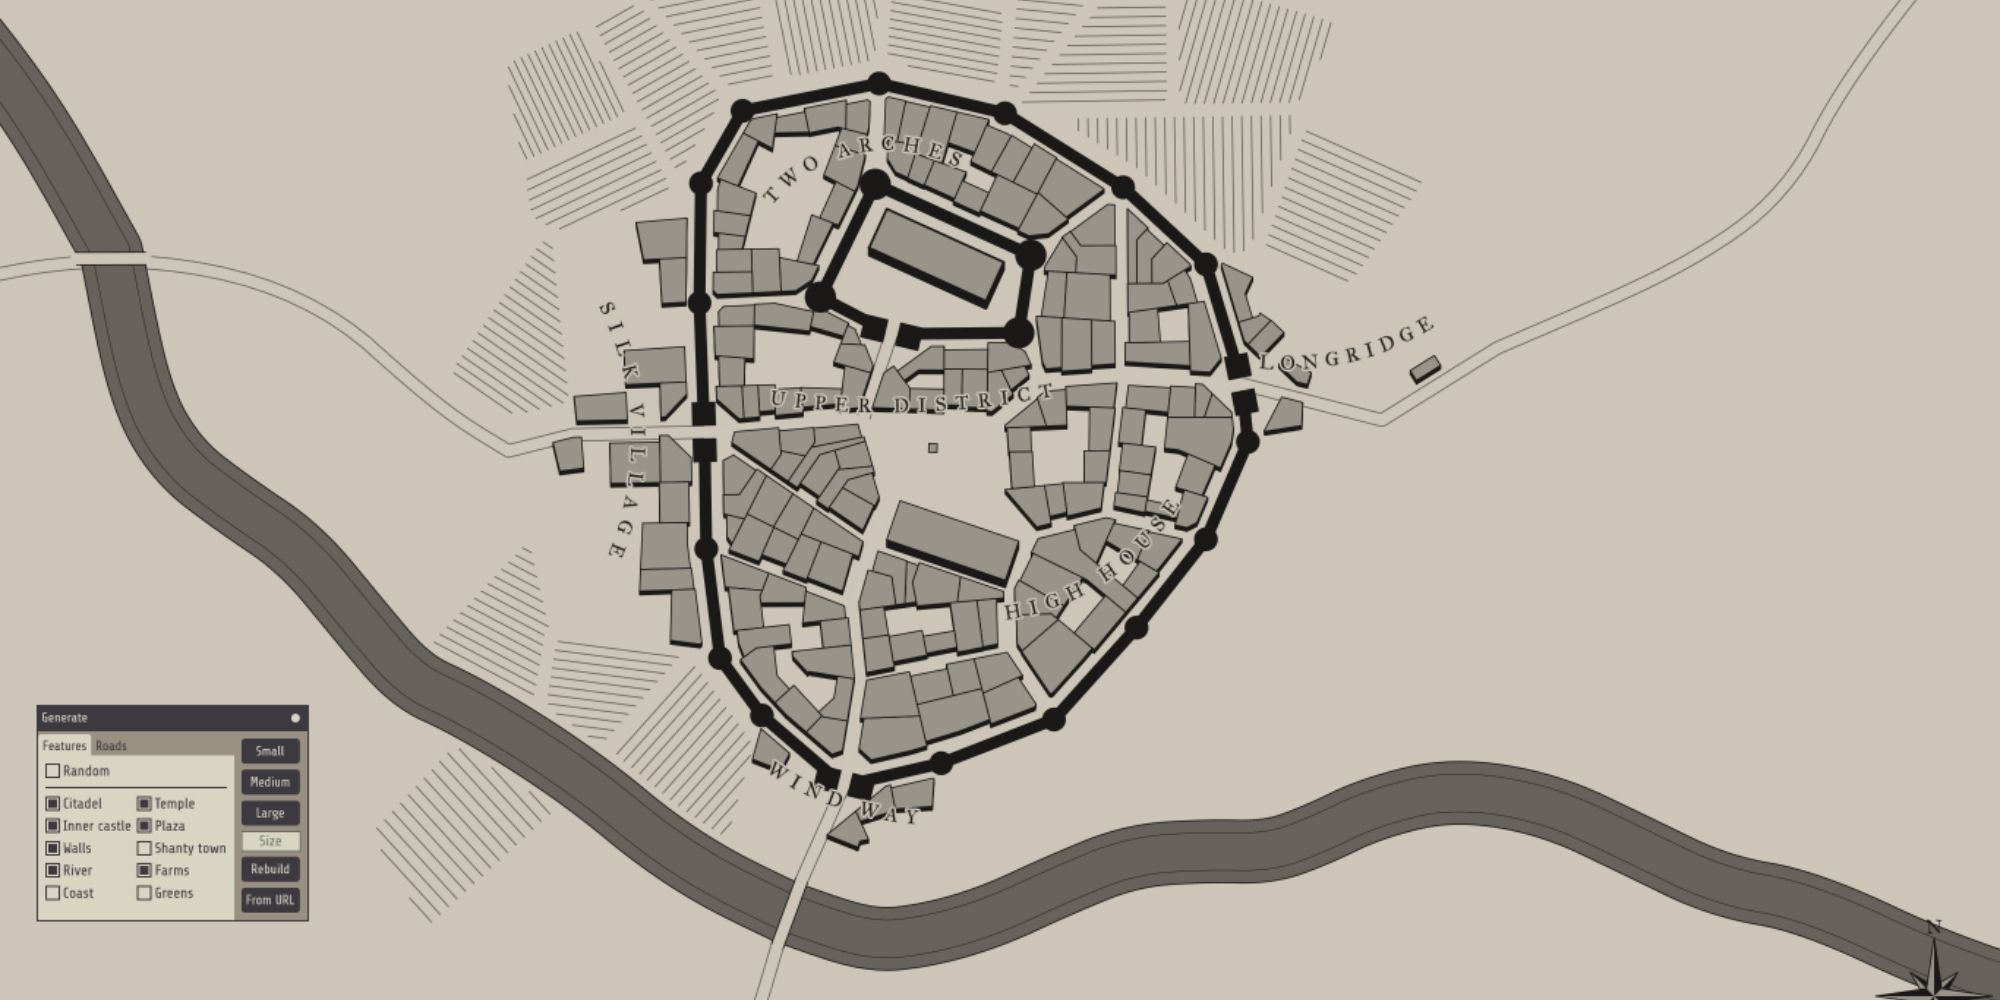 Randomly generated black and white cityscape complete with farms, roads, walls and rivers